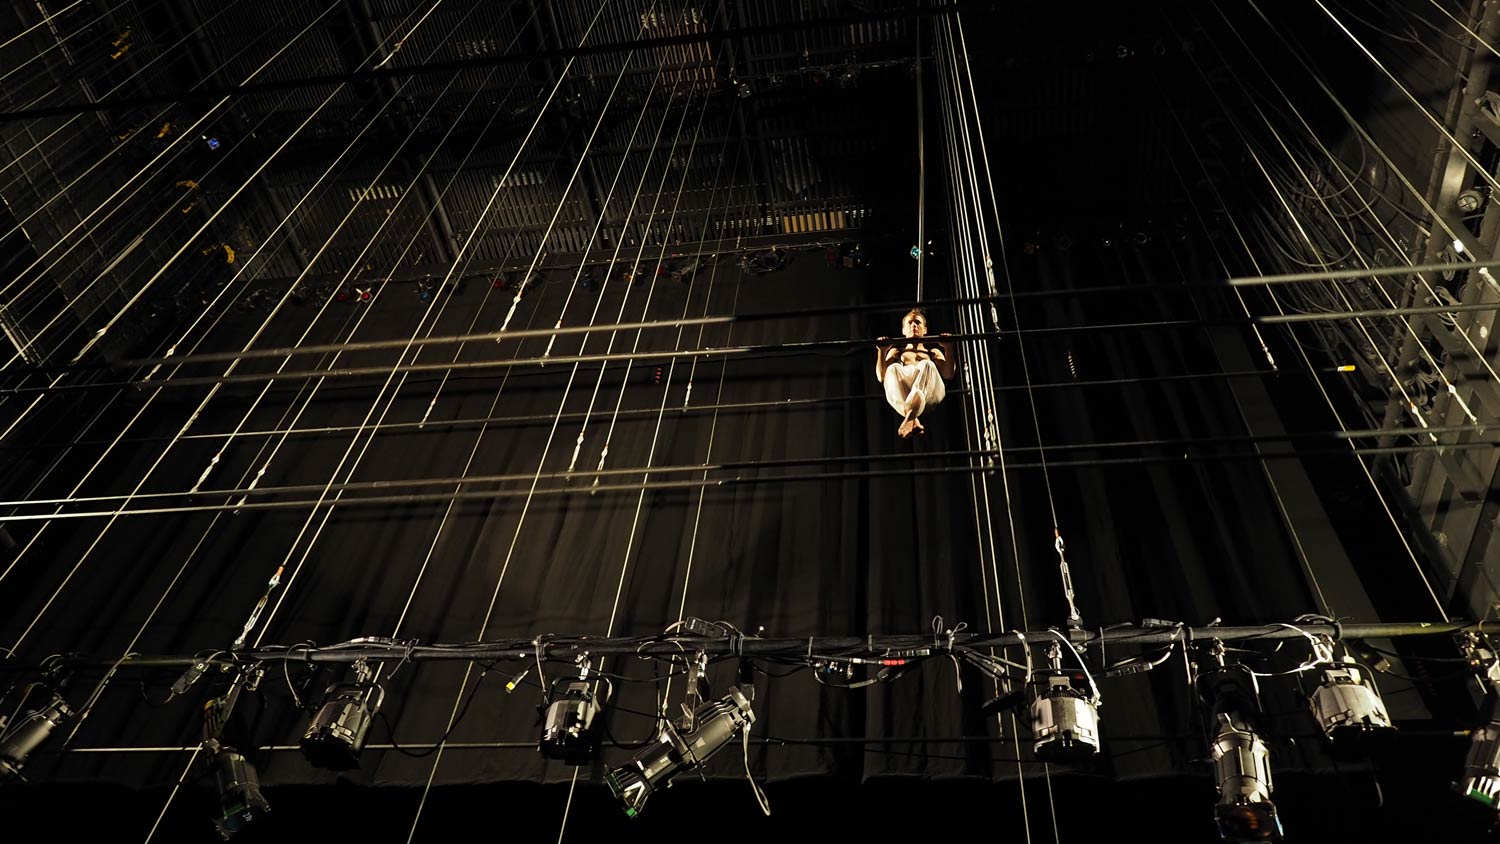 A dancer suspended 40 feet up among the theater fly tower line sets in a black box theater. 